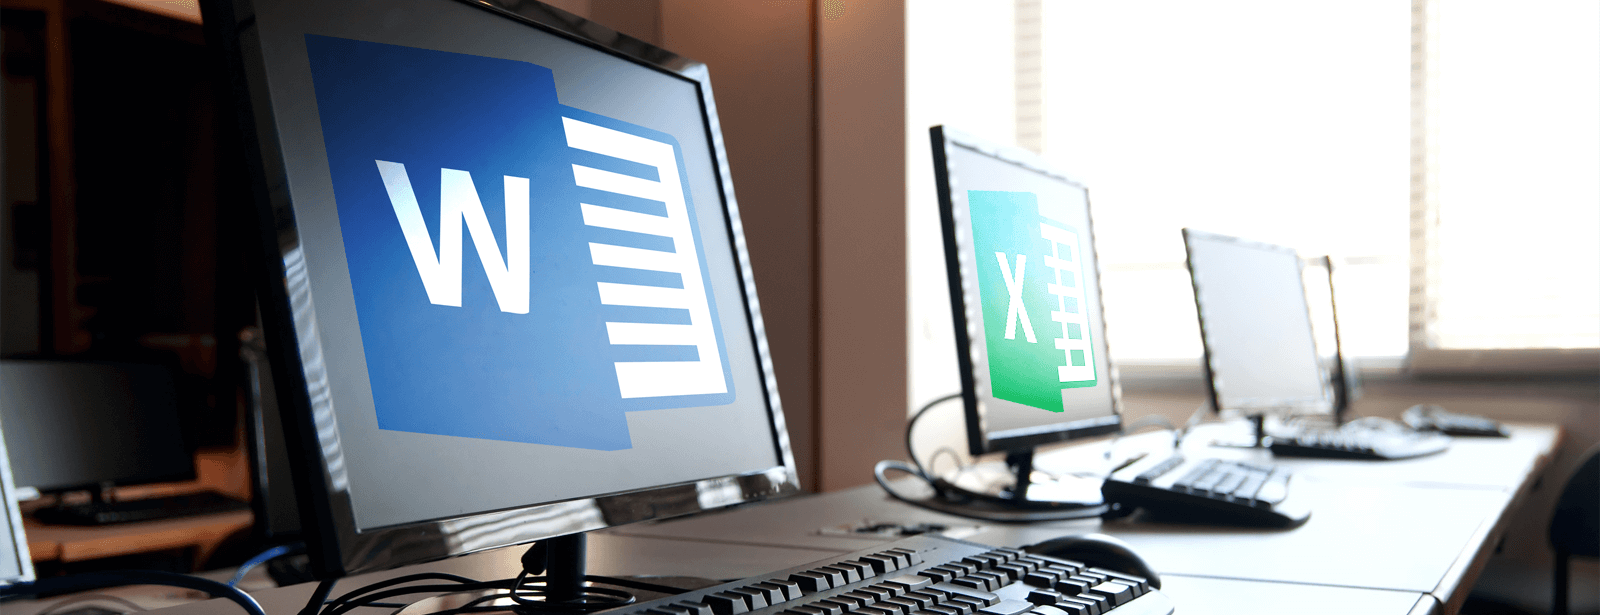 Curs Operare Excel / Word – Profesional Top Training